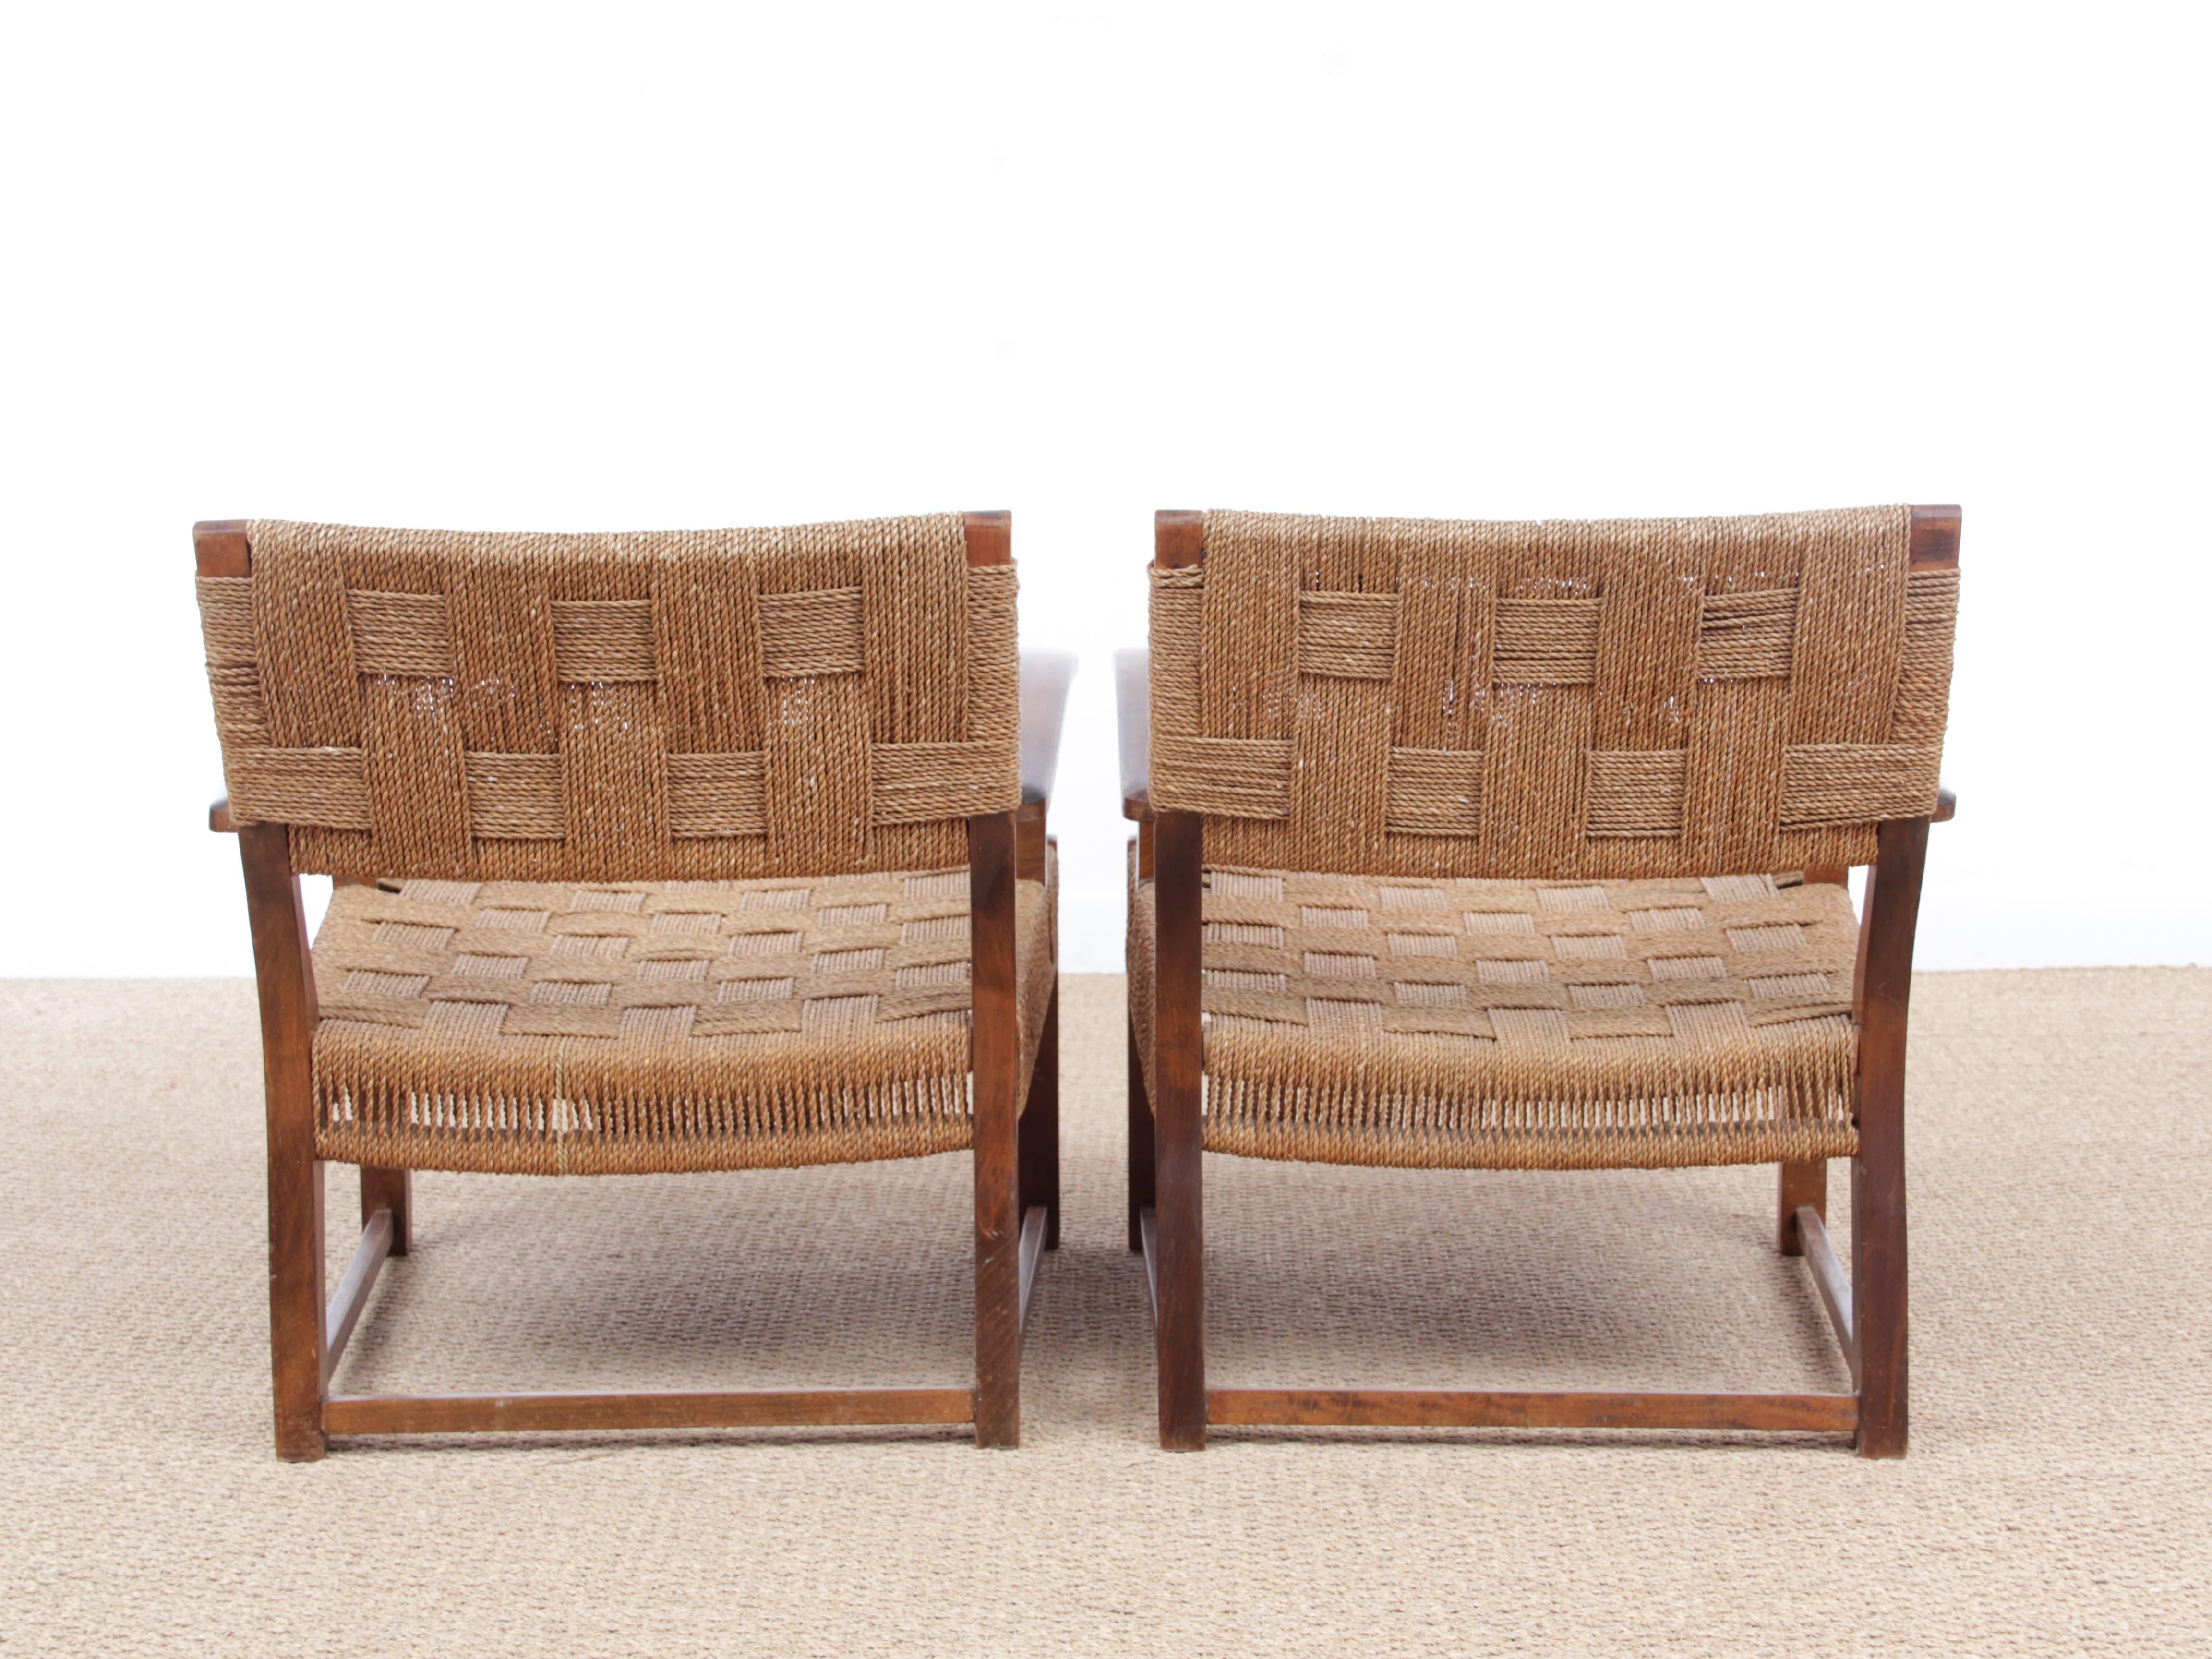 Danish Mid-Century Modern Pair of Armchairs with Woven Sea Grass by Fritz Schlegel